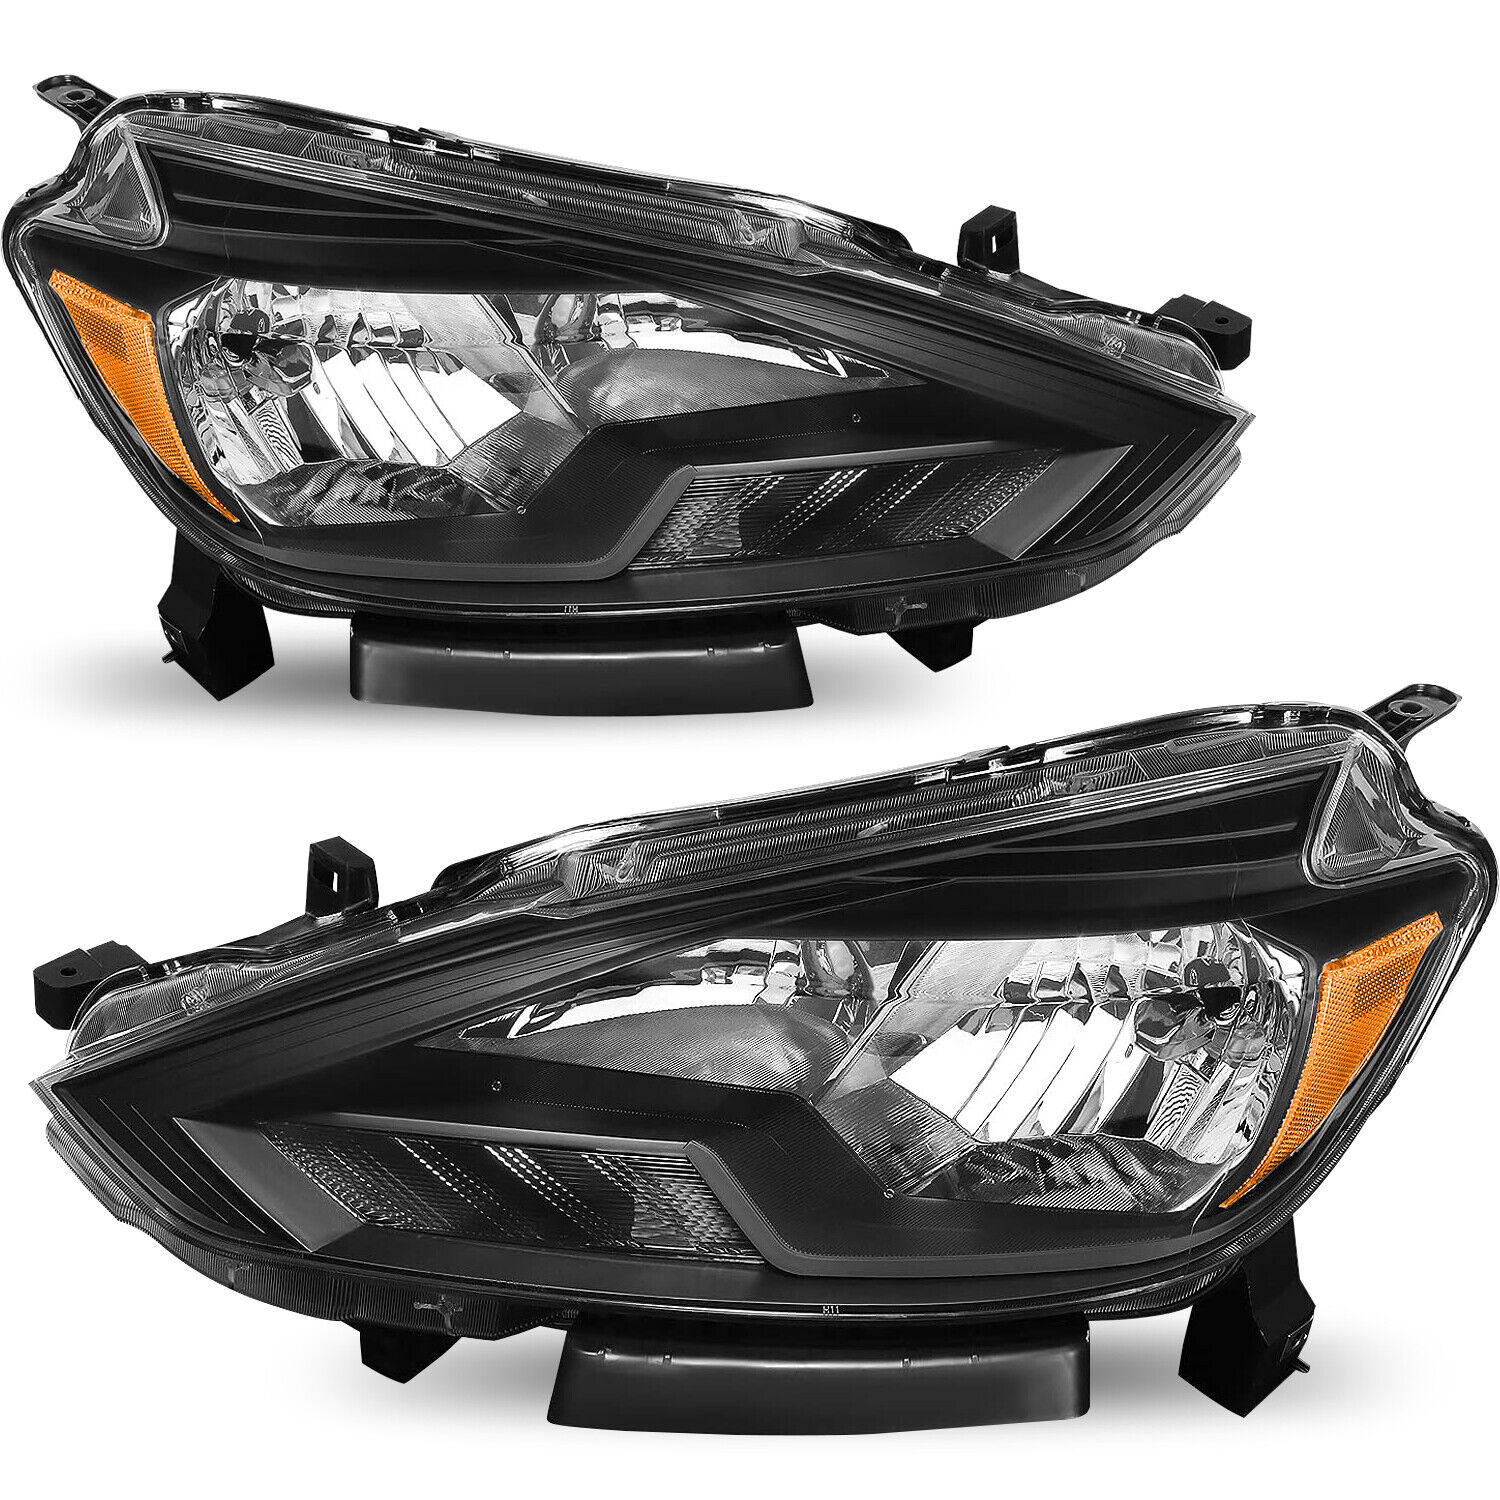 For Nissan Sentra 2016-2019 Halogen Headlights Replacement Headlamps Left+Right